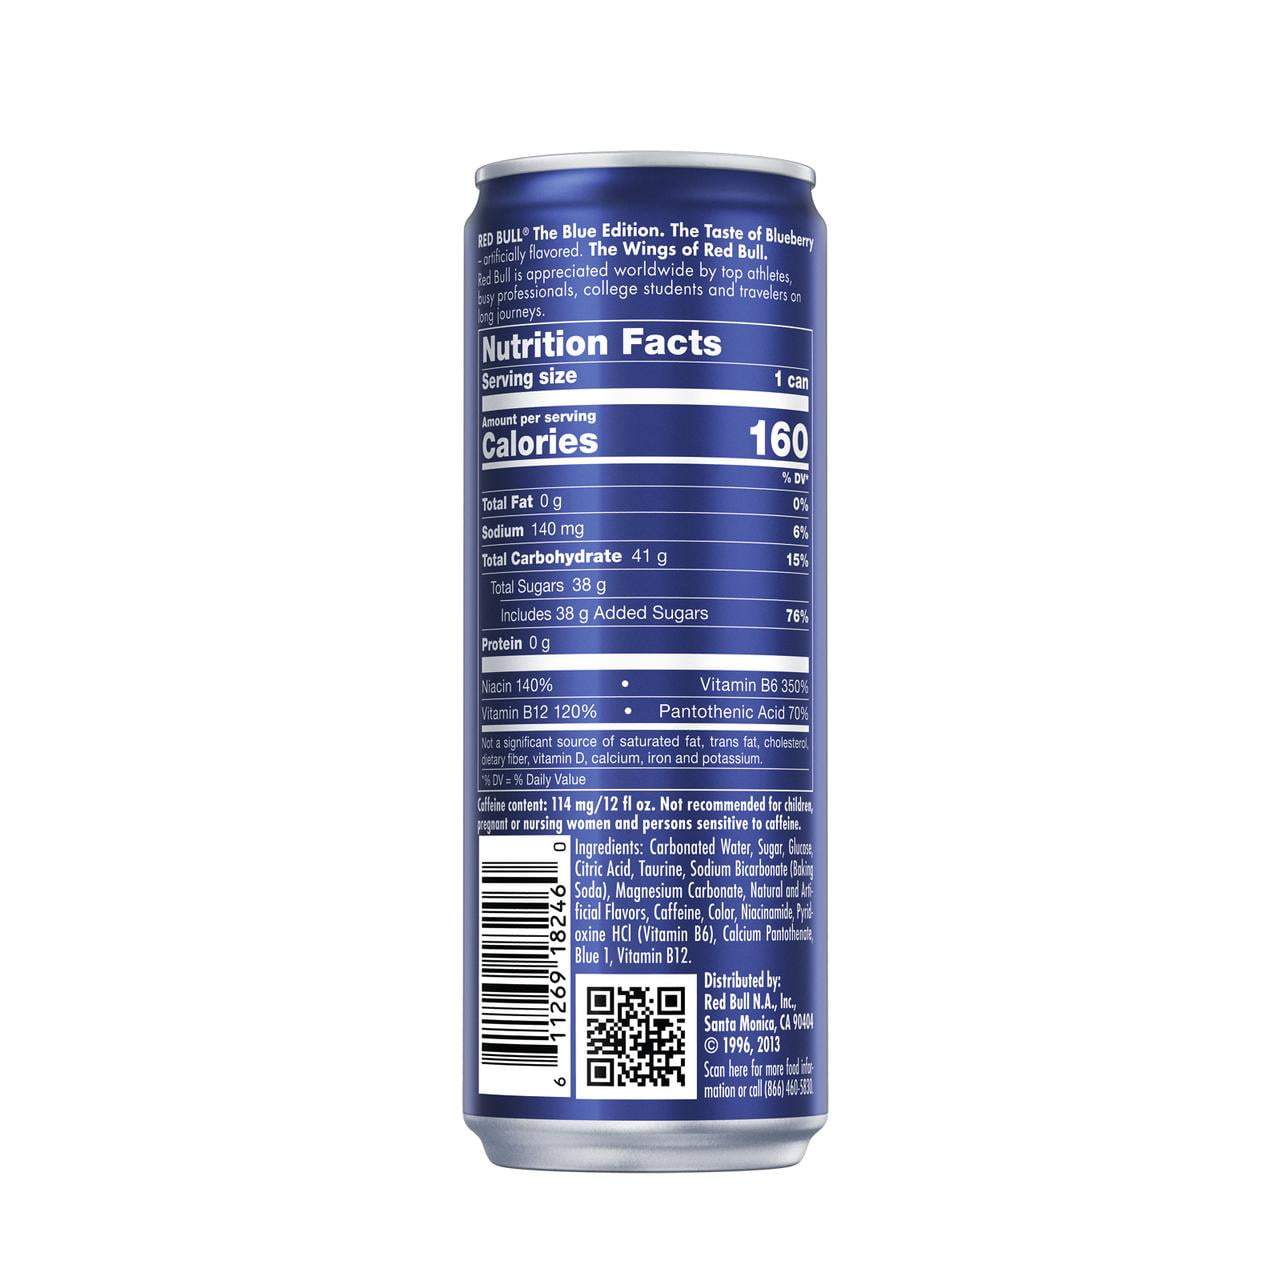 Red Bull Blue Edition Blueberry Energy Drink, 12 fl oz, Pack of 4 Cans